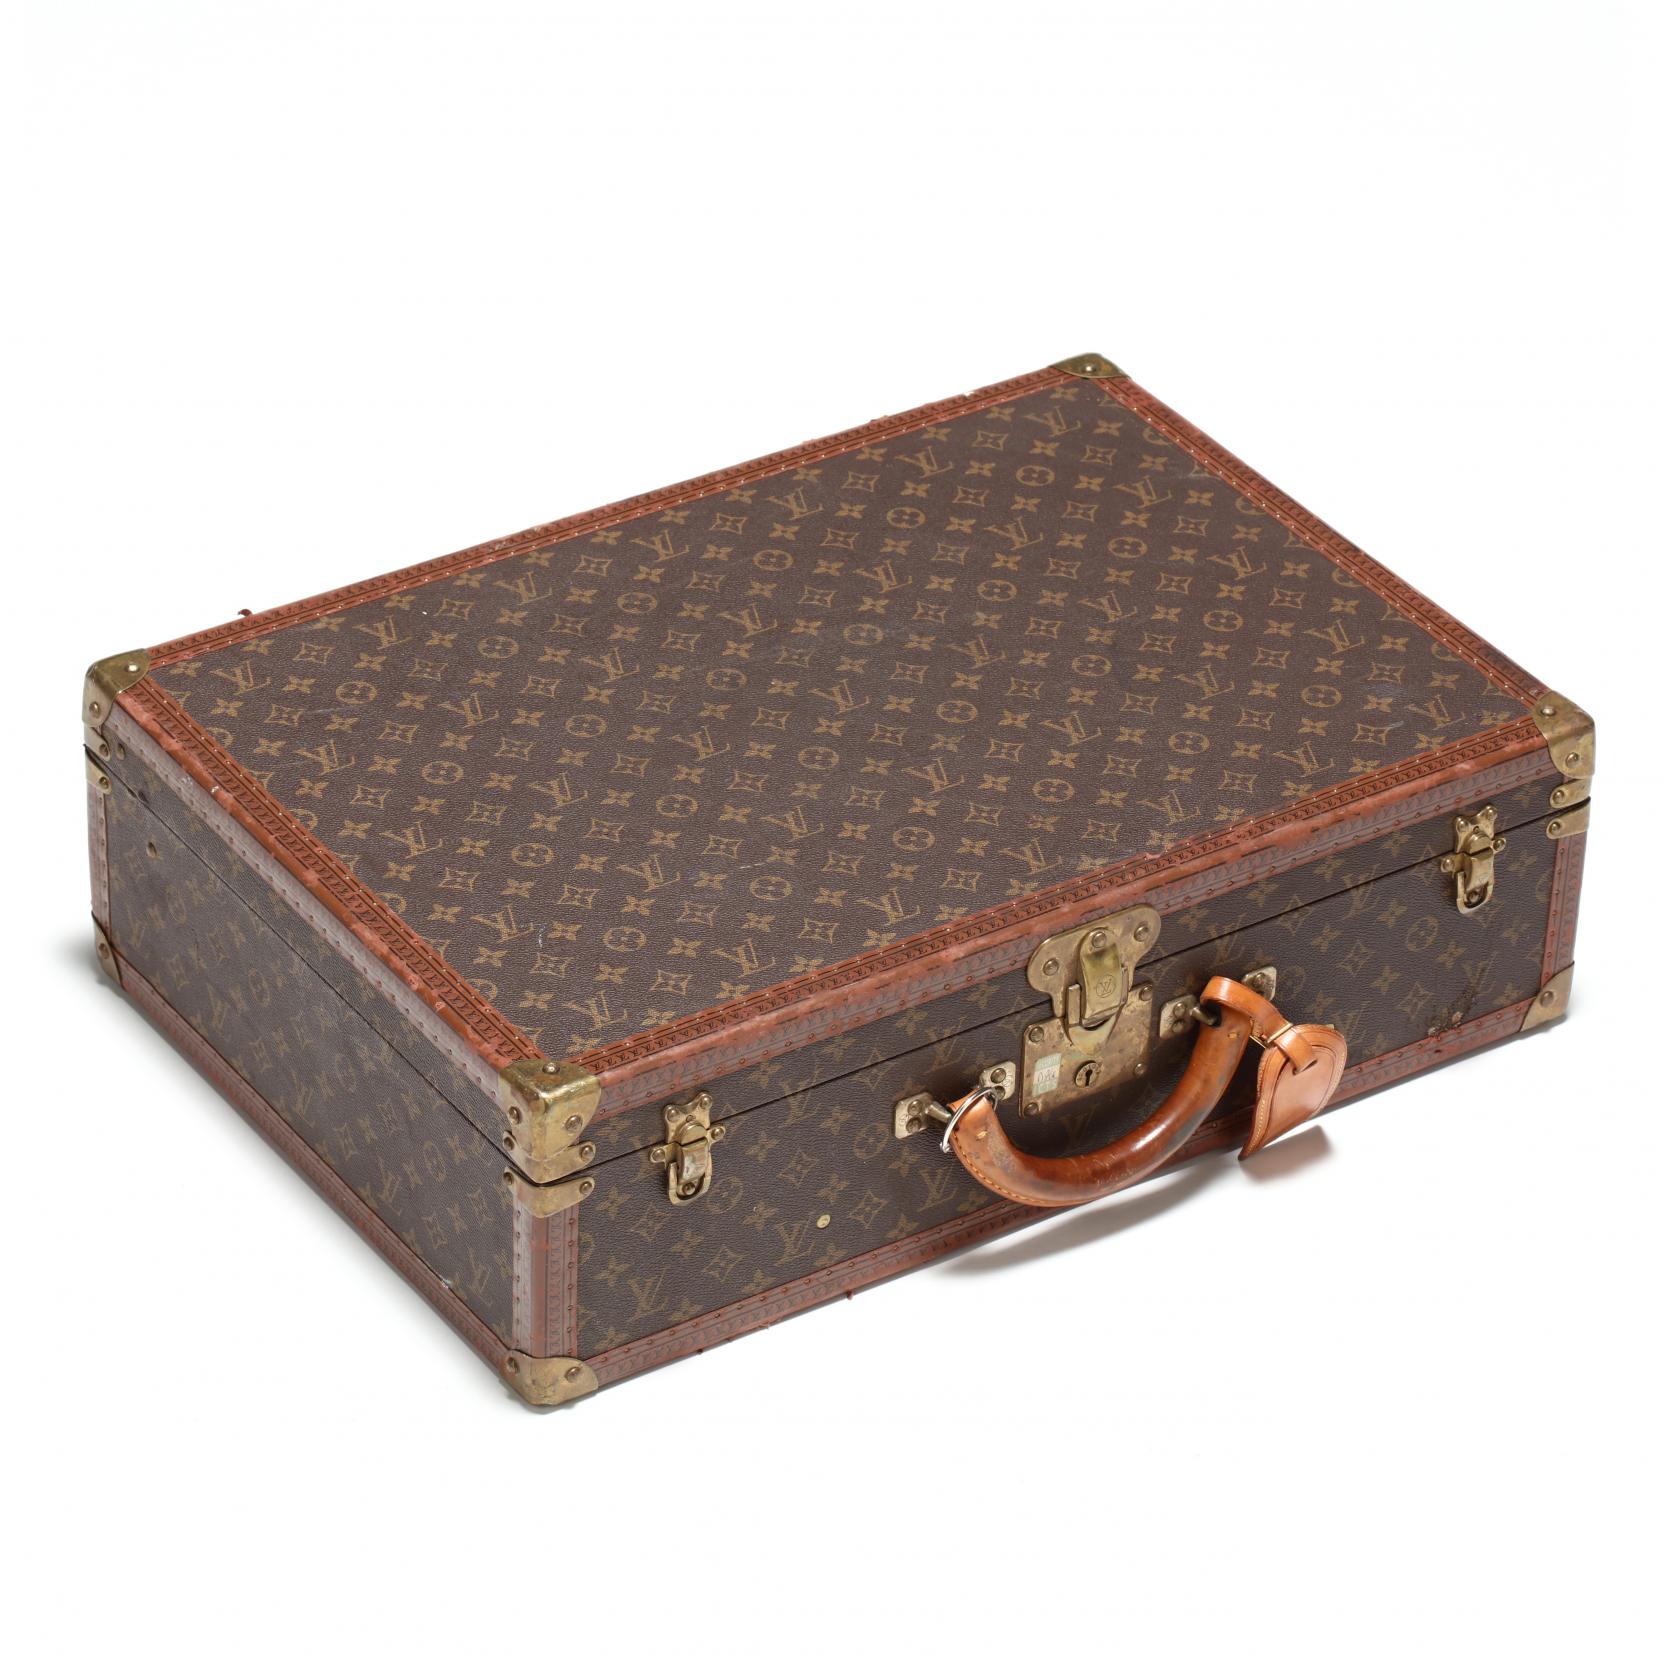 Hard Sided Suitcase Bisten 7, Louis Vuitton (Lot 123 - The Fall Quarterly  Auction featuring The Collection of Esther B. Ferguson, Secessionville  Manor, SCSep 16, 2017, 10:00am)